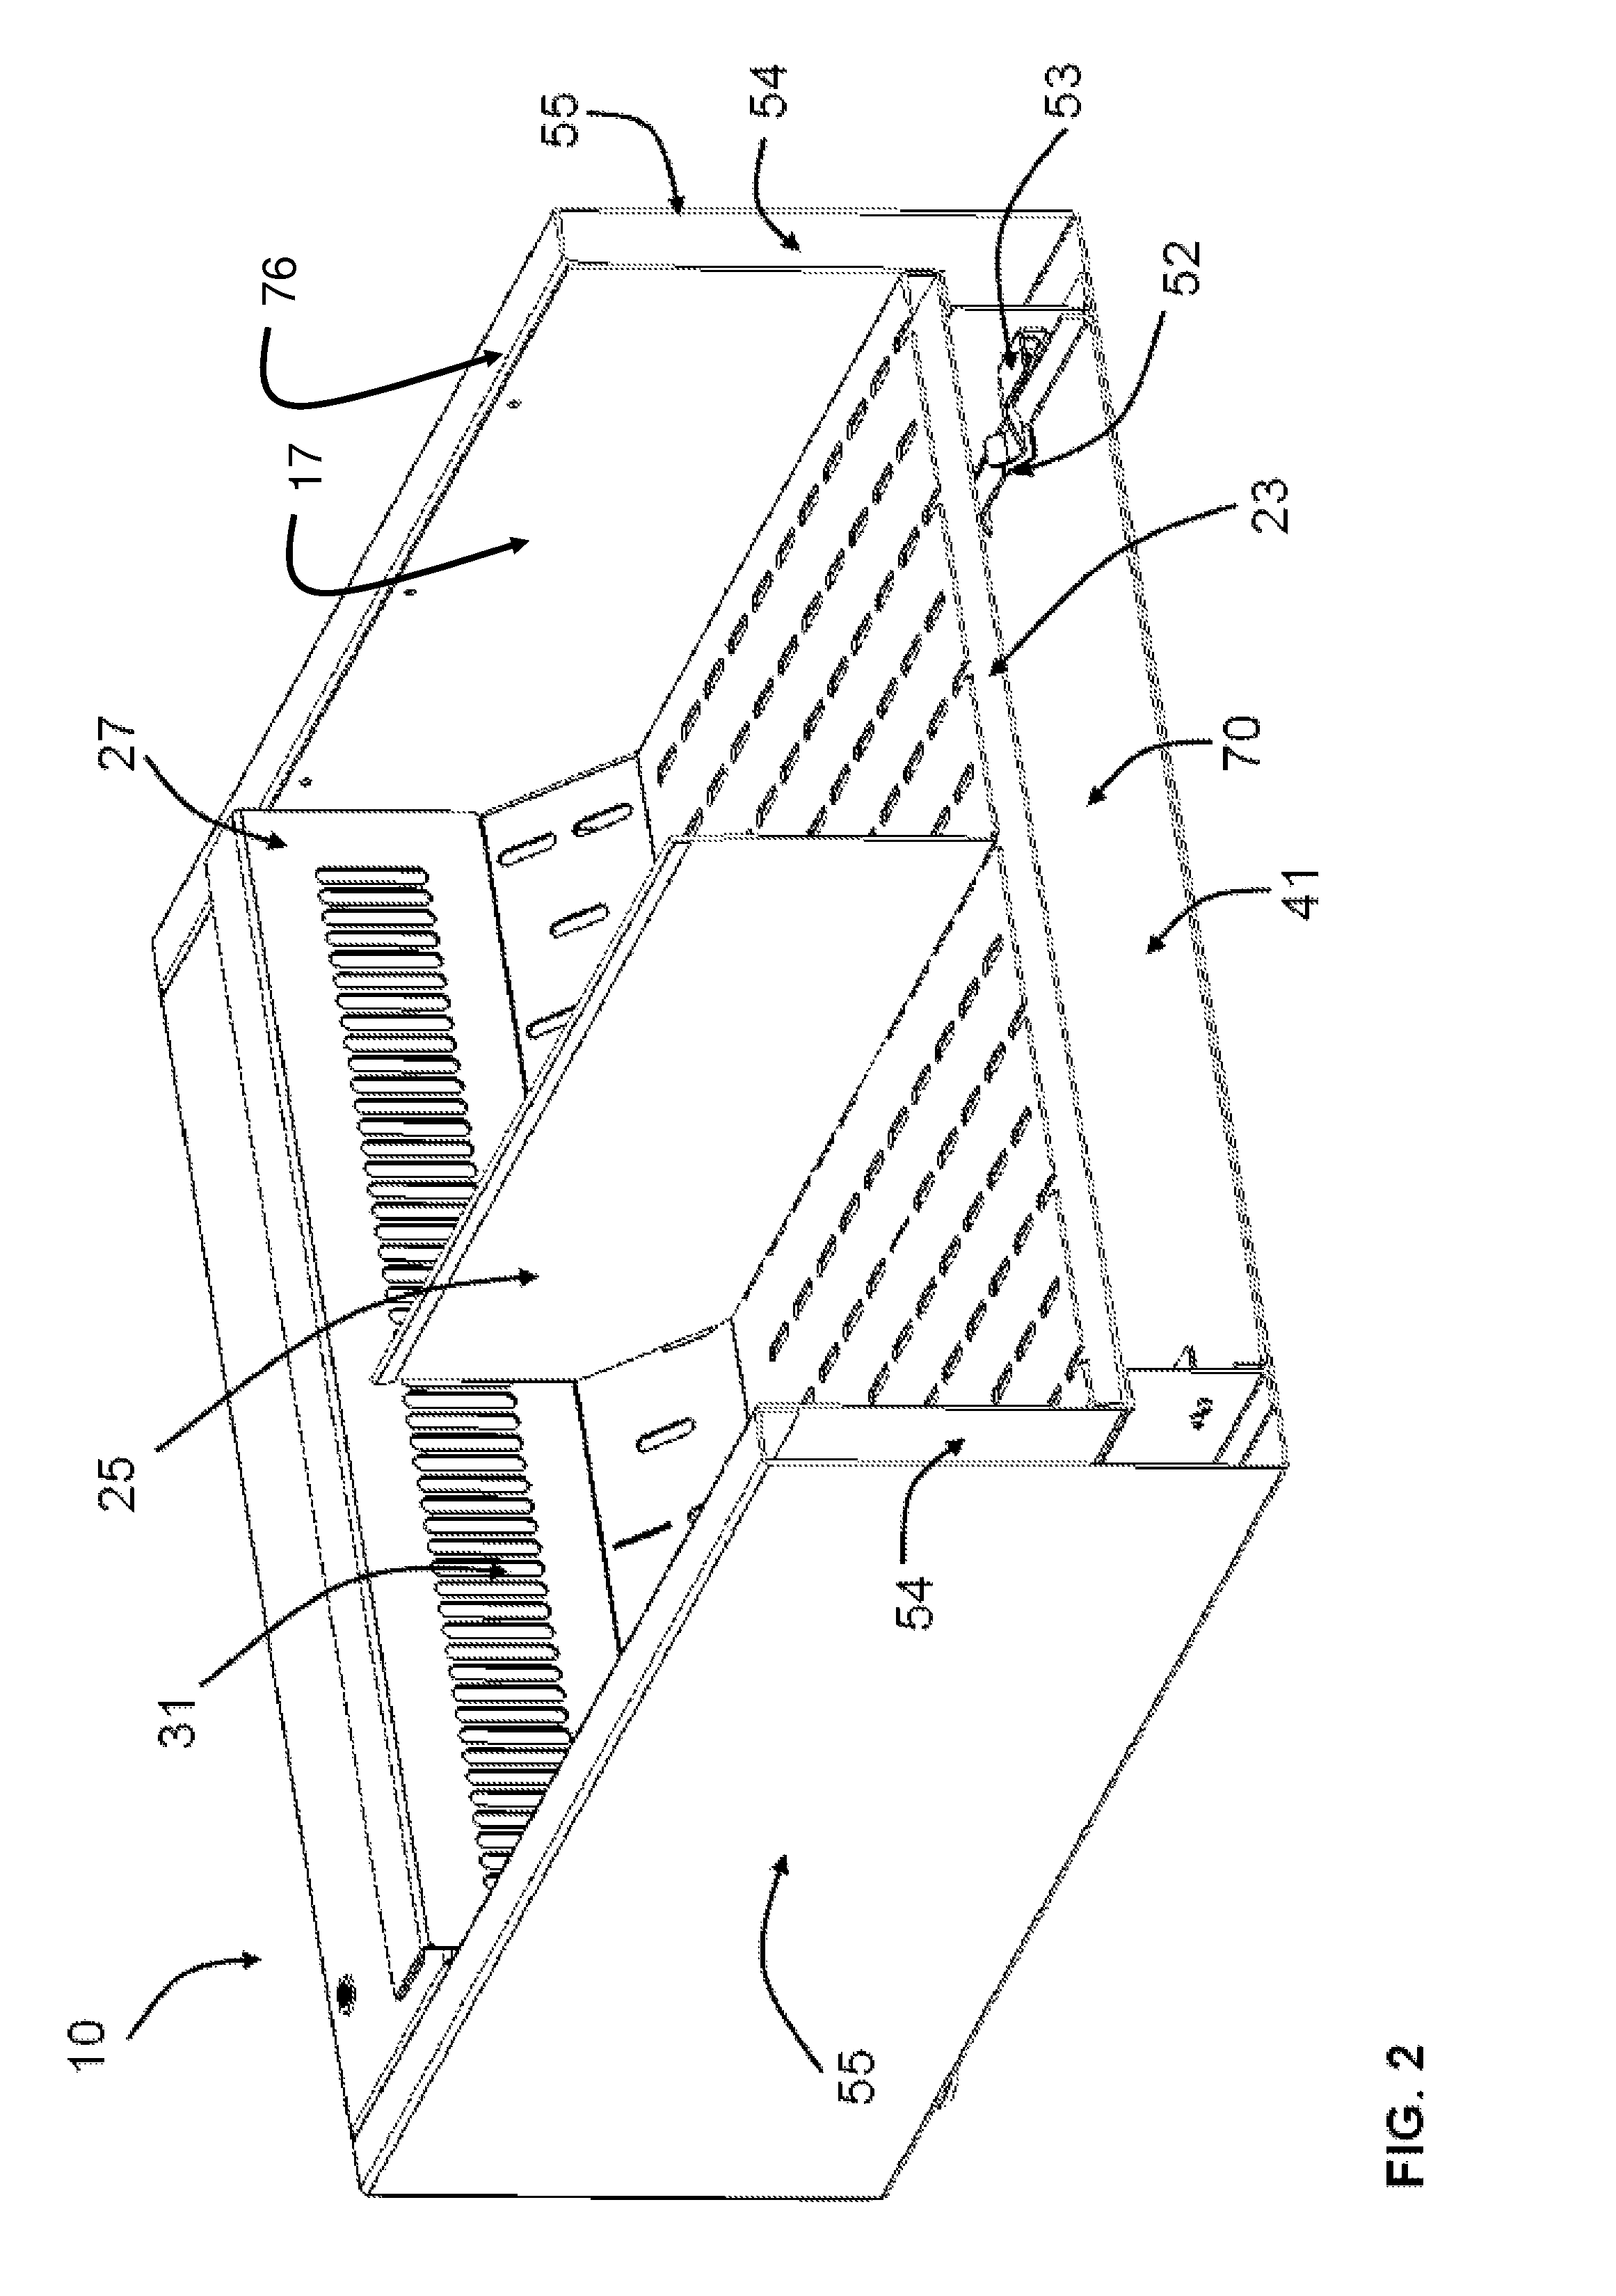 Apparatus for extending the holding time for food